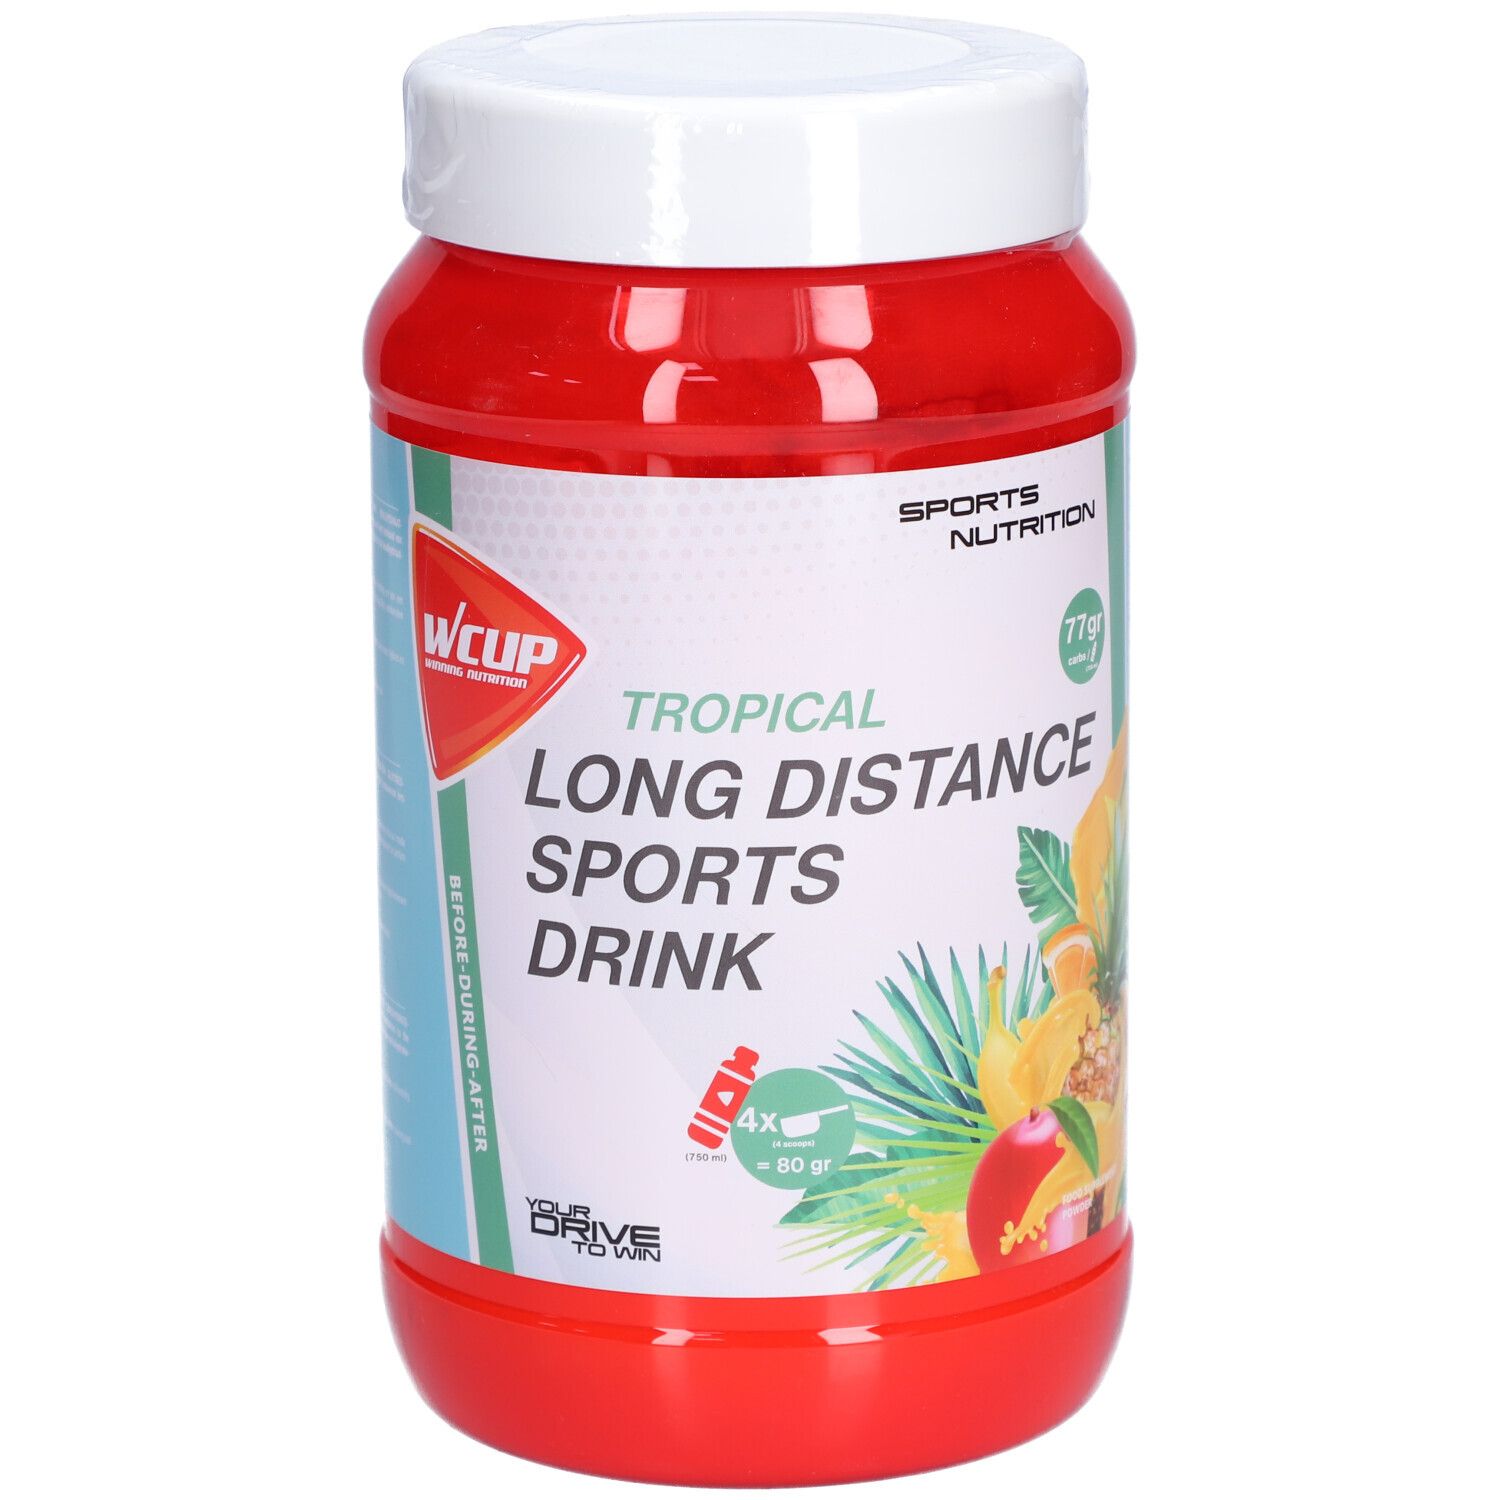 Image of WCUP Long Distance Sports Drink (Limited Edition)